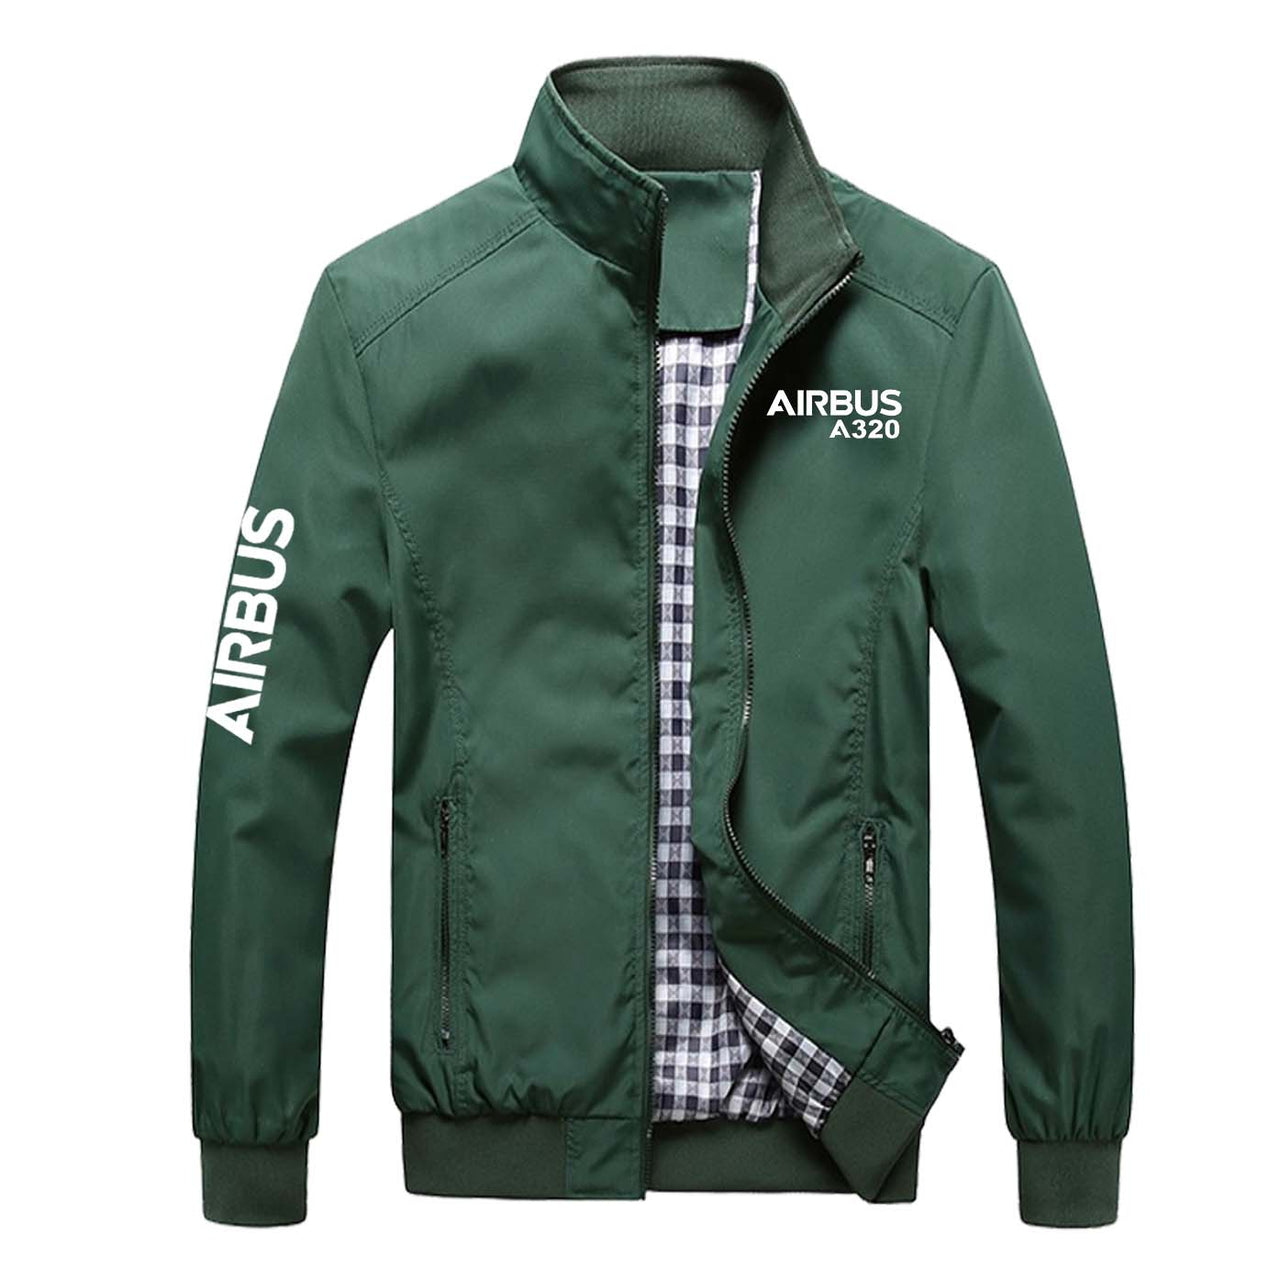 Airbus A320 & Text Designed Stylish Jackets